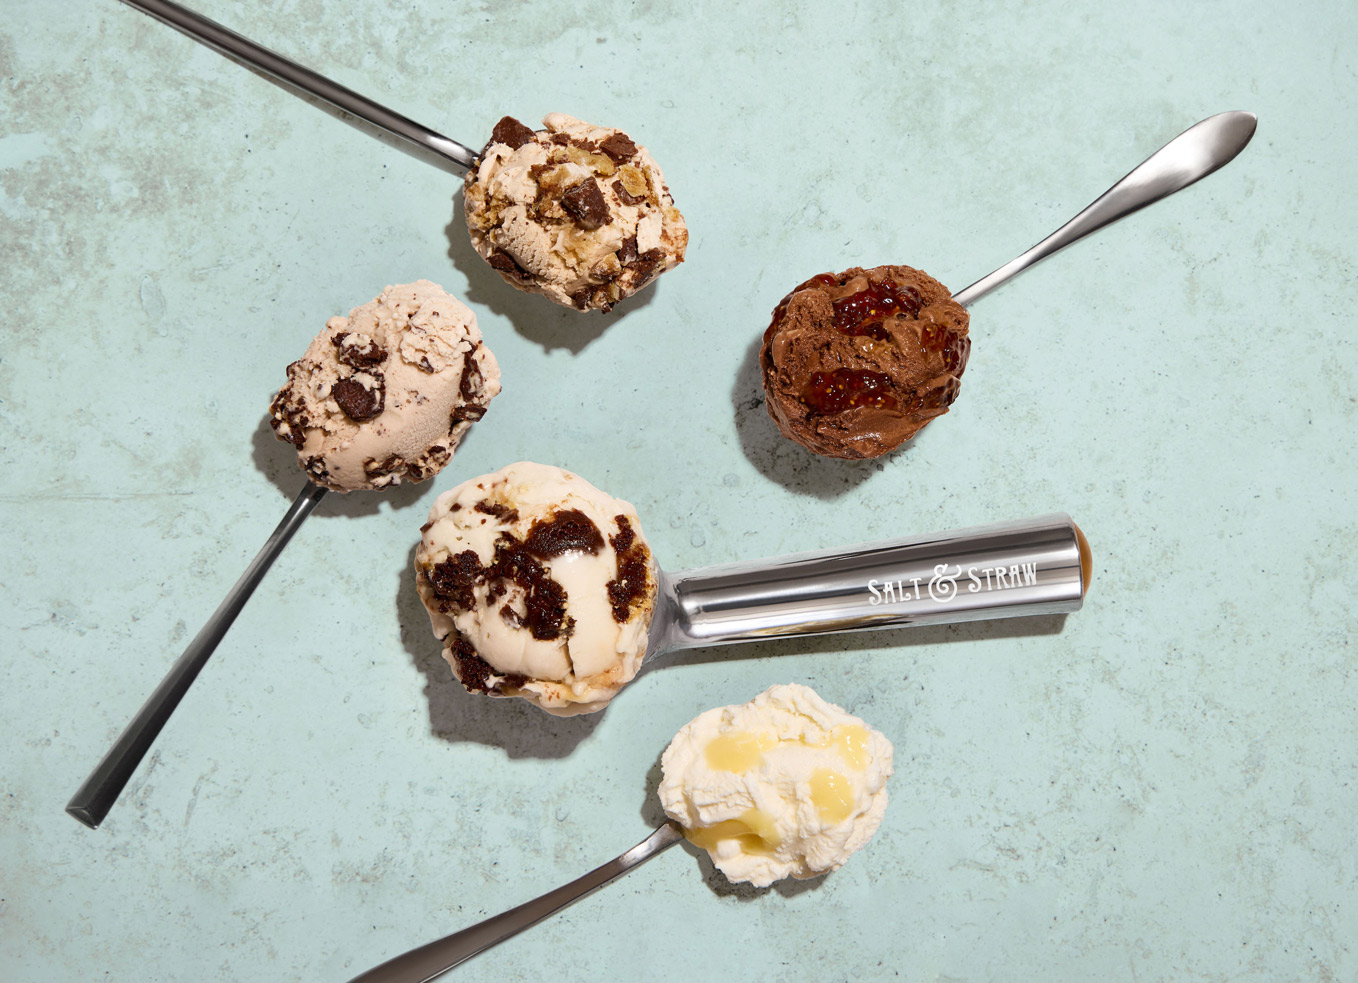 Flavors from Salt and Straw Upcycled Food Series